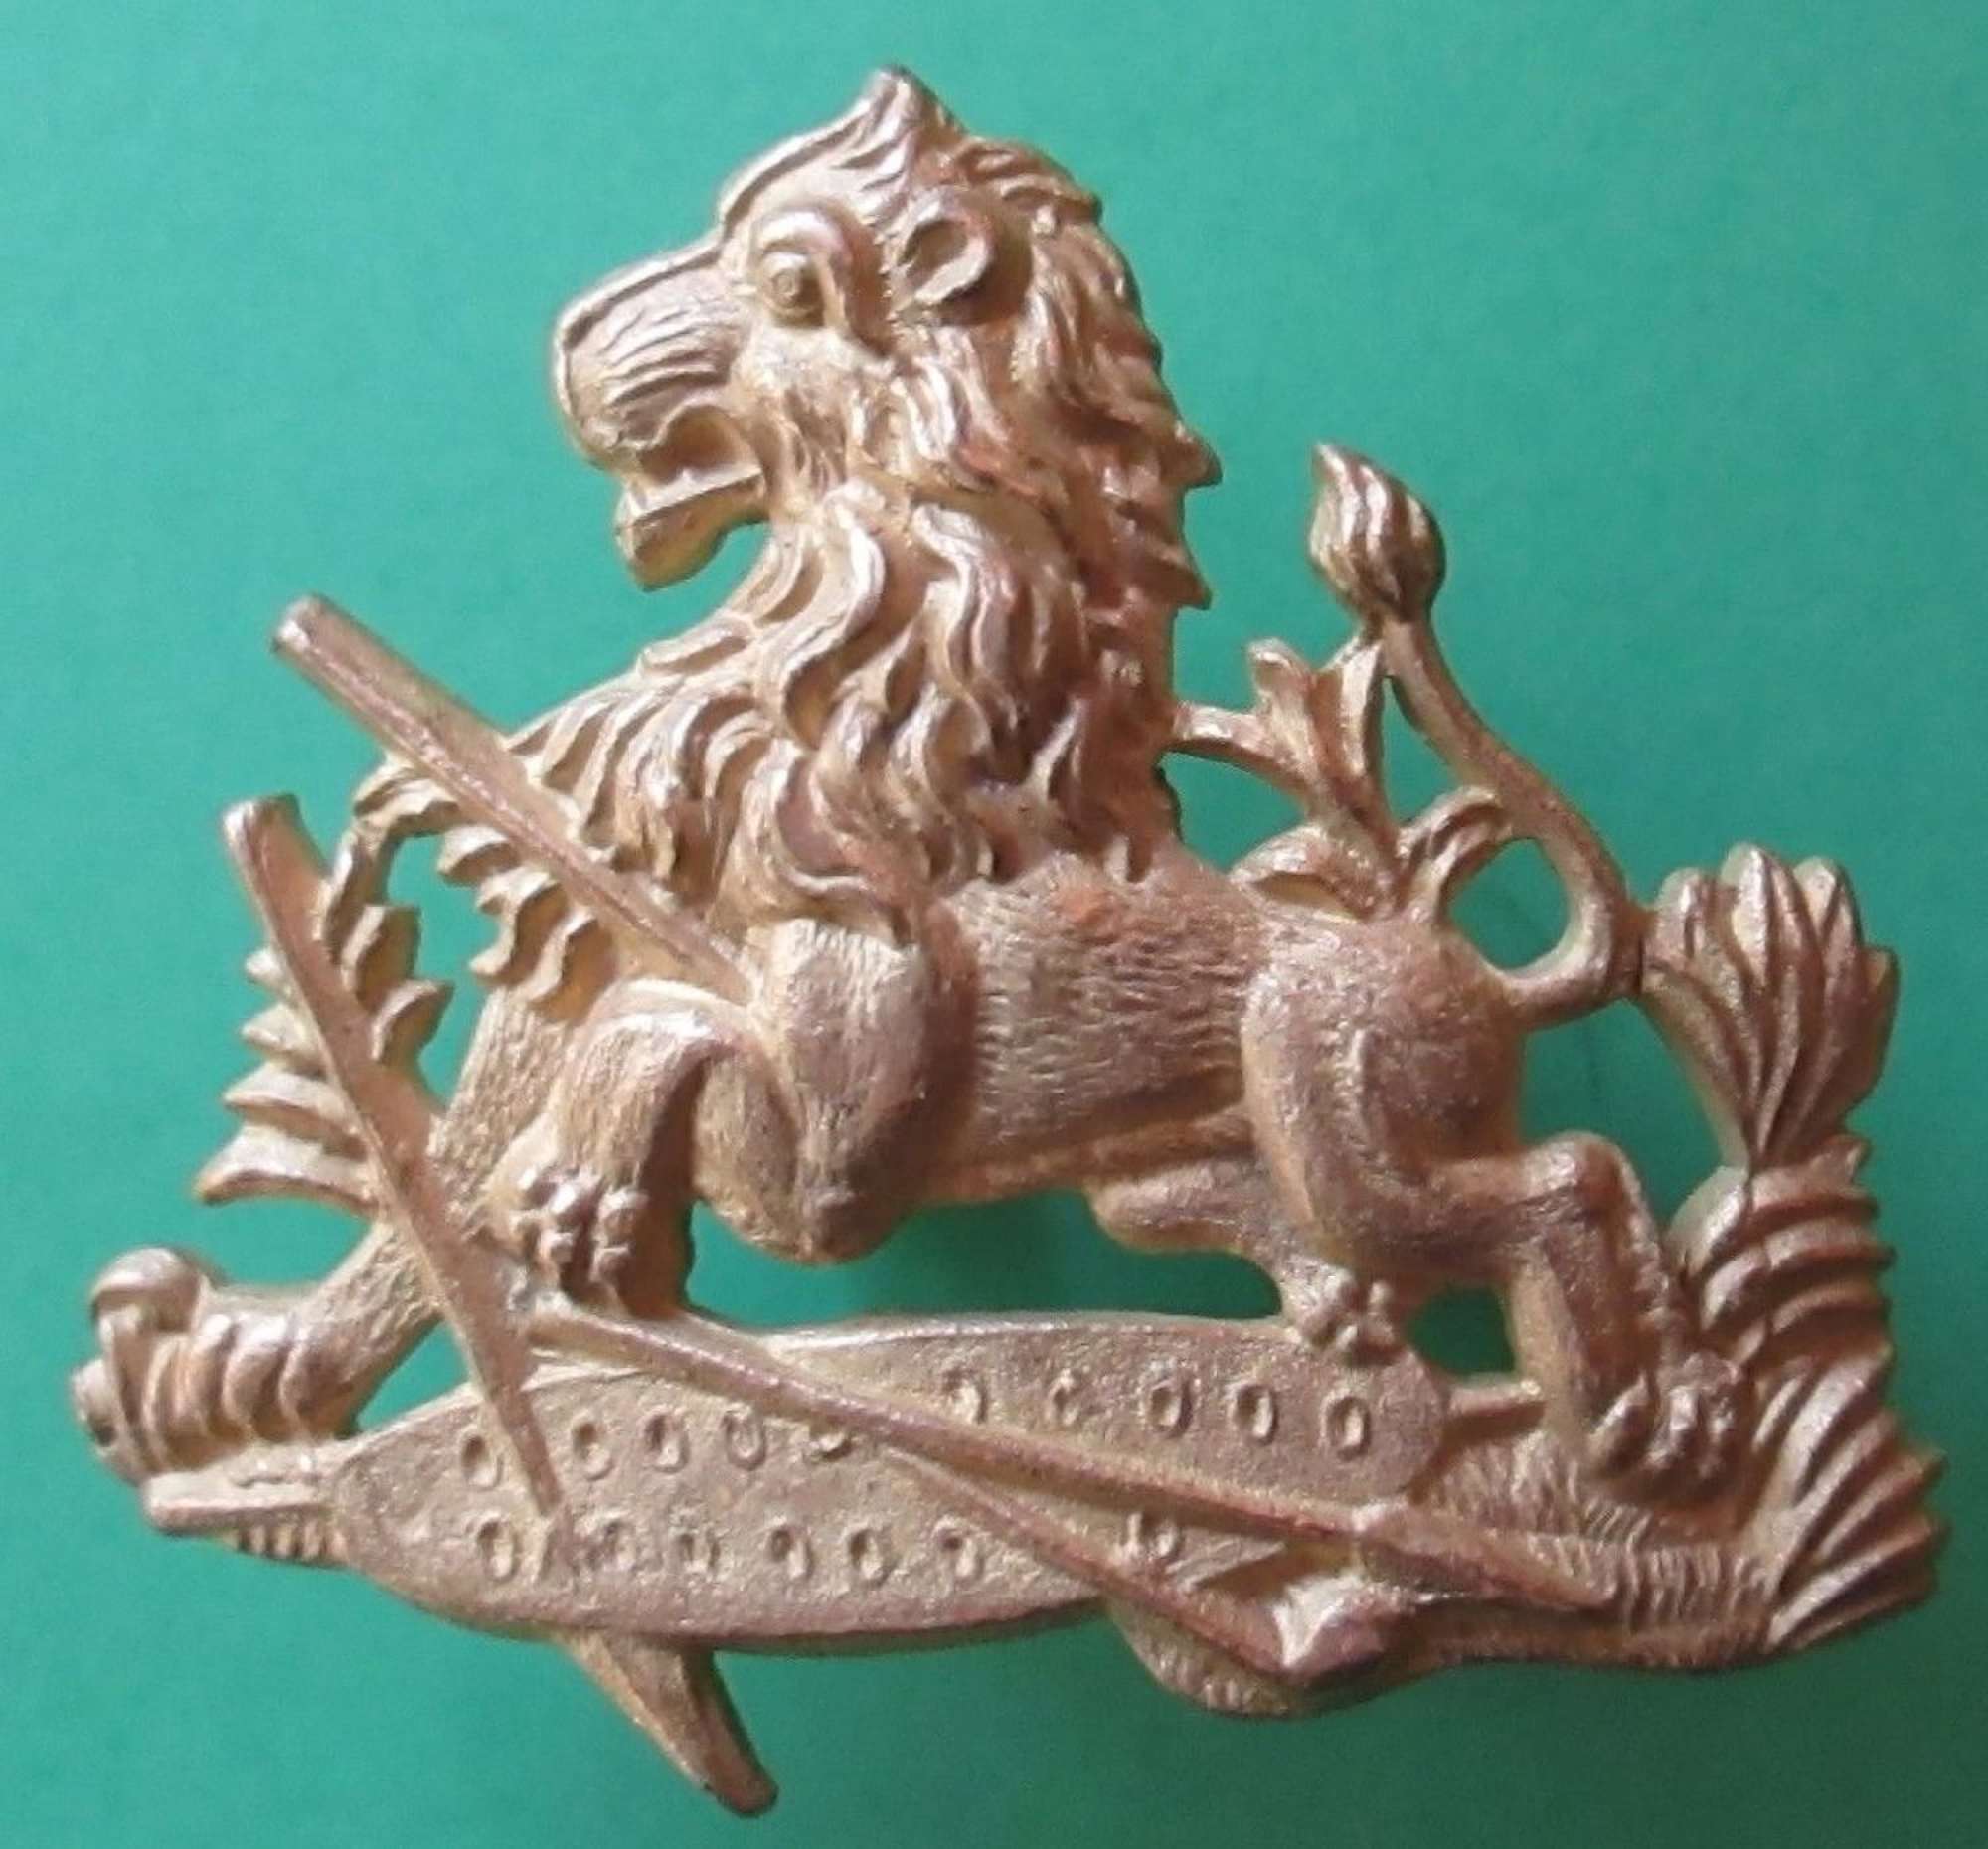 A BRITISH SOUTH AFRICAN POLICE GILT CAP BADGE